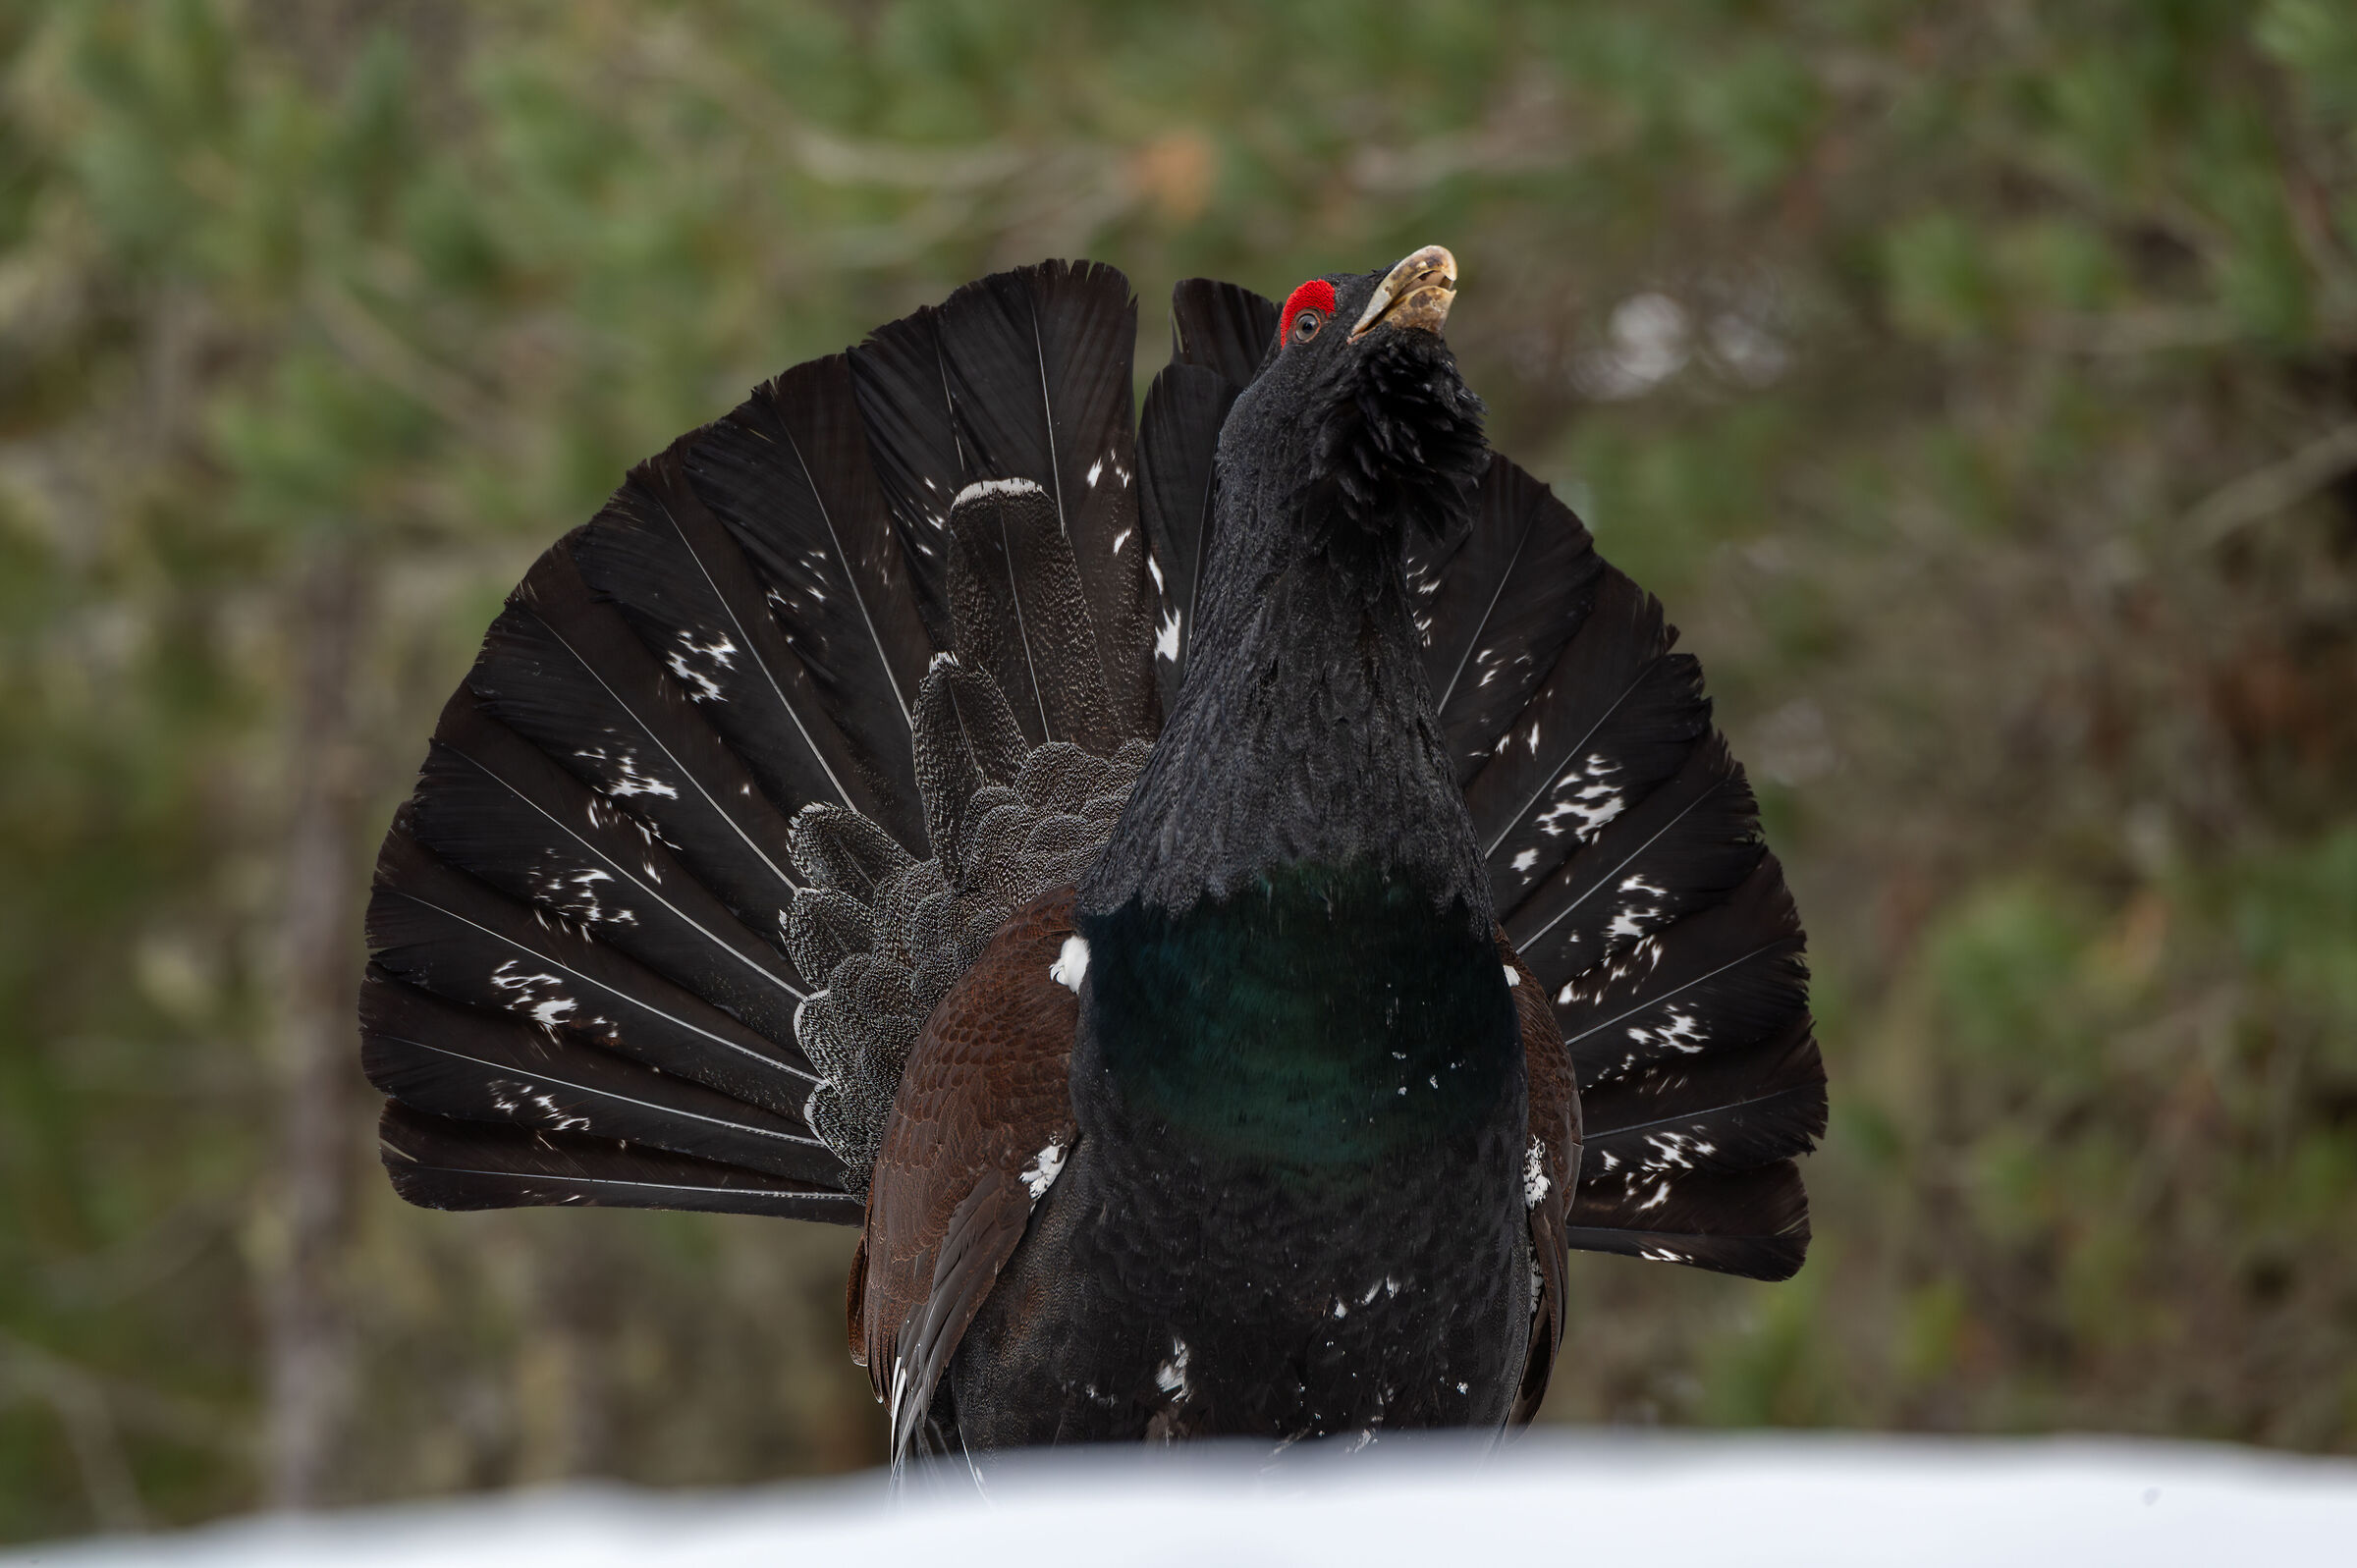 Capercaillie in the Dolomites...